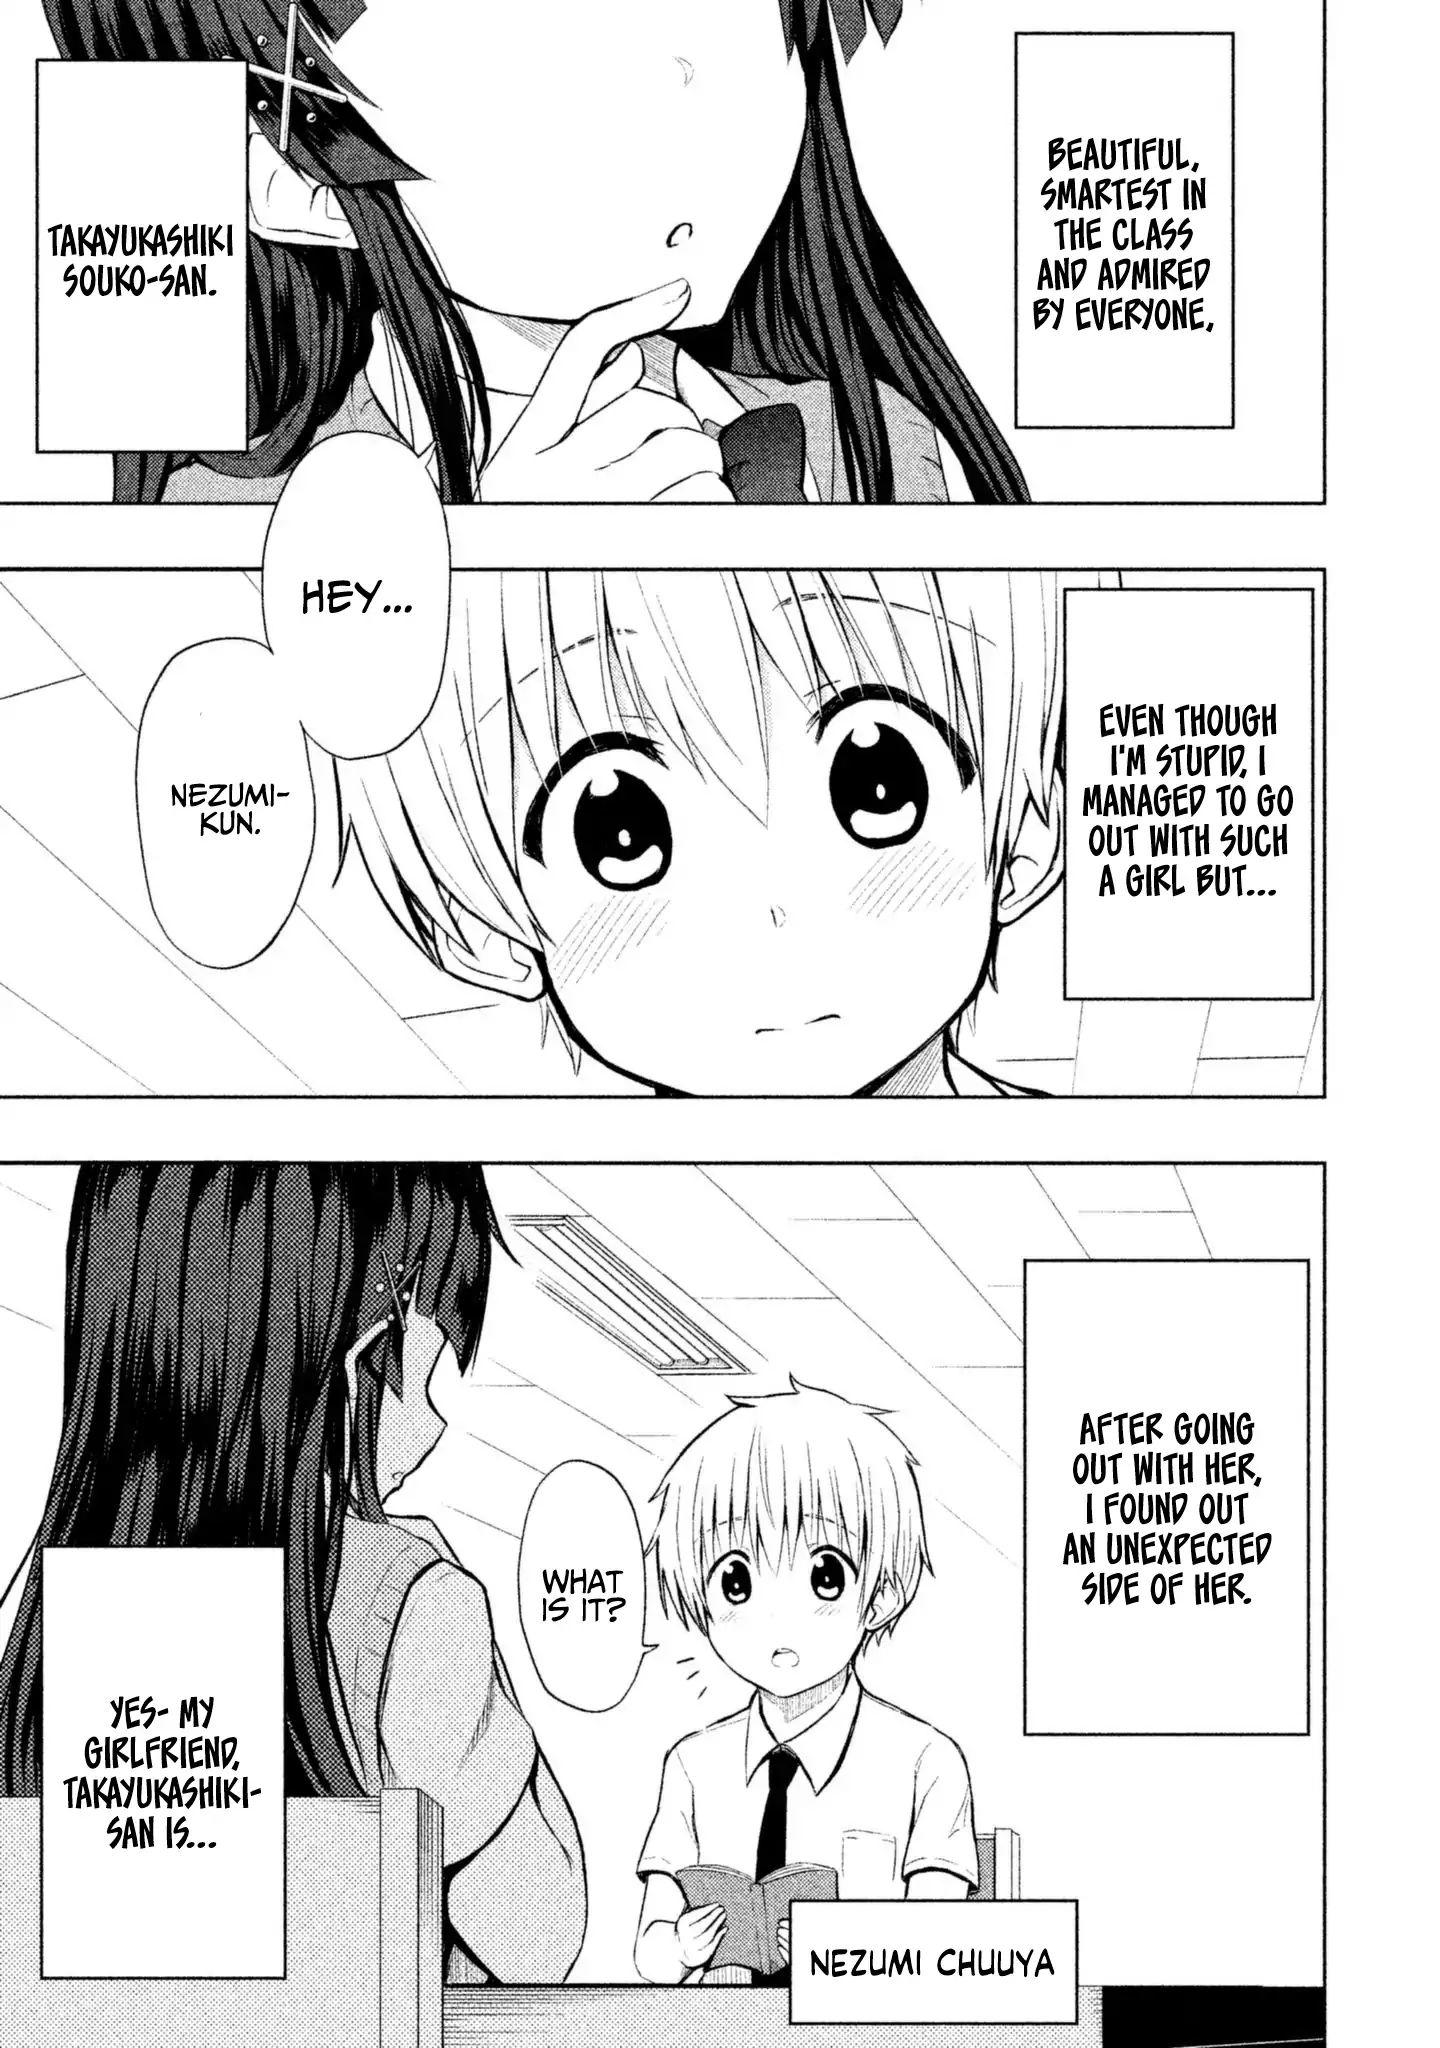 A Girl Who Is Very Well-Informed About Weird Knowledge, Takayukashiki Souko-San Vol.1 Chapter 1: Chest page 6 - Mangakakalots.com